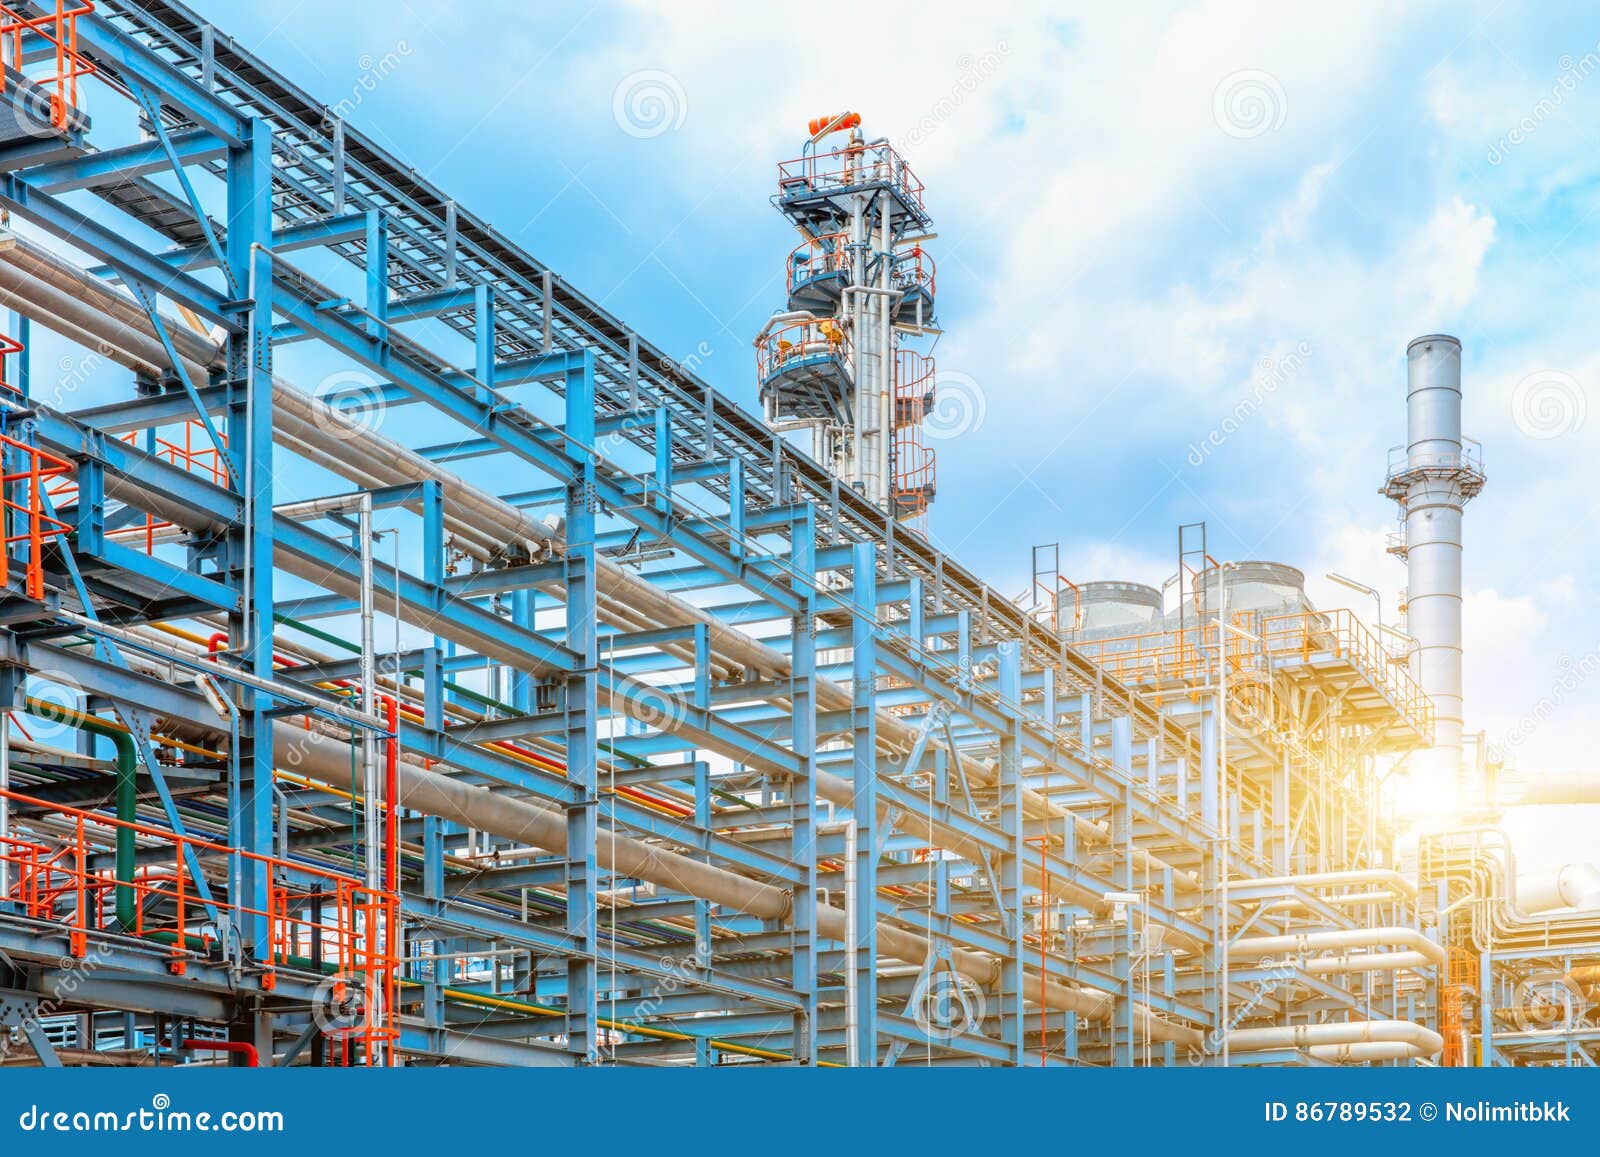 petrochemical oil refinery, refinery oil and gas industry, the equipment of oil refining, close-up of pipelines and petrochemical